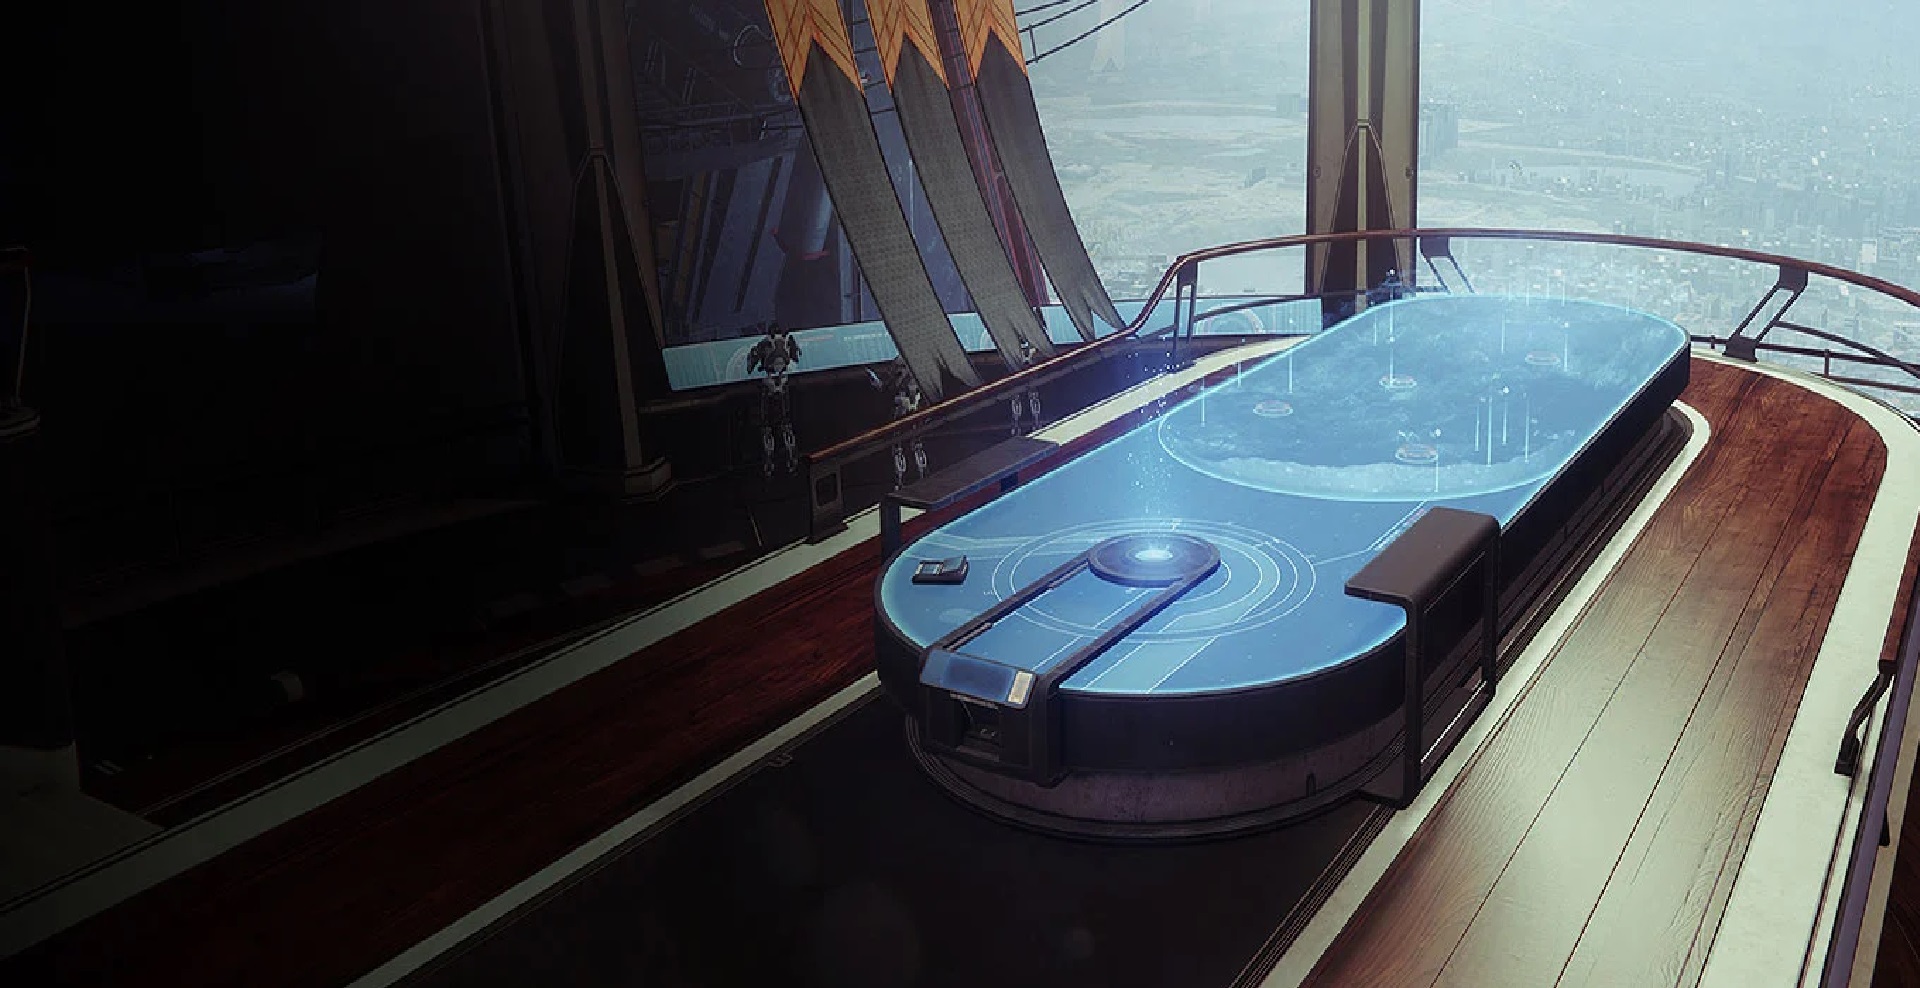 Have You Appreciated The Hardwood Floor In The H.E.L.M. In Destiny 2?